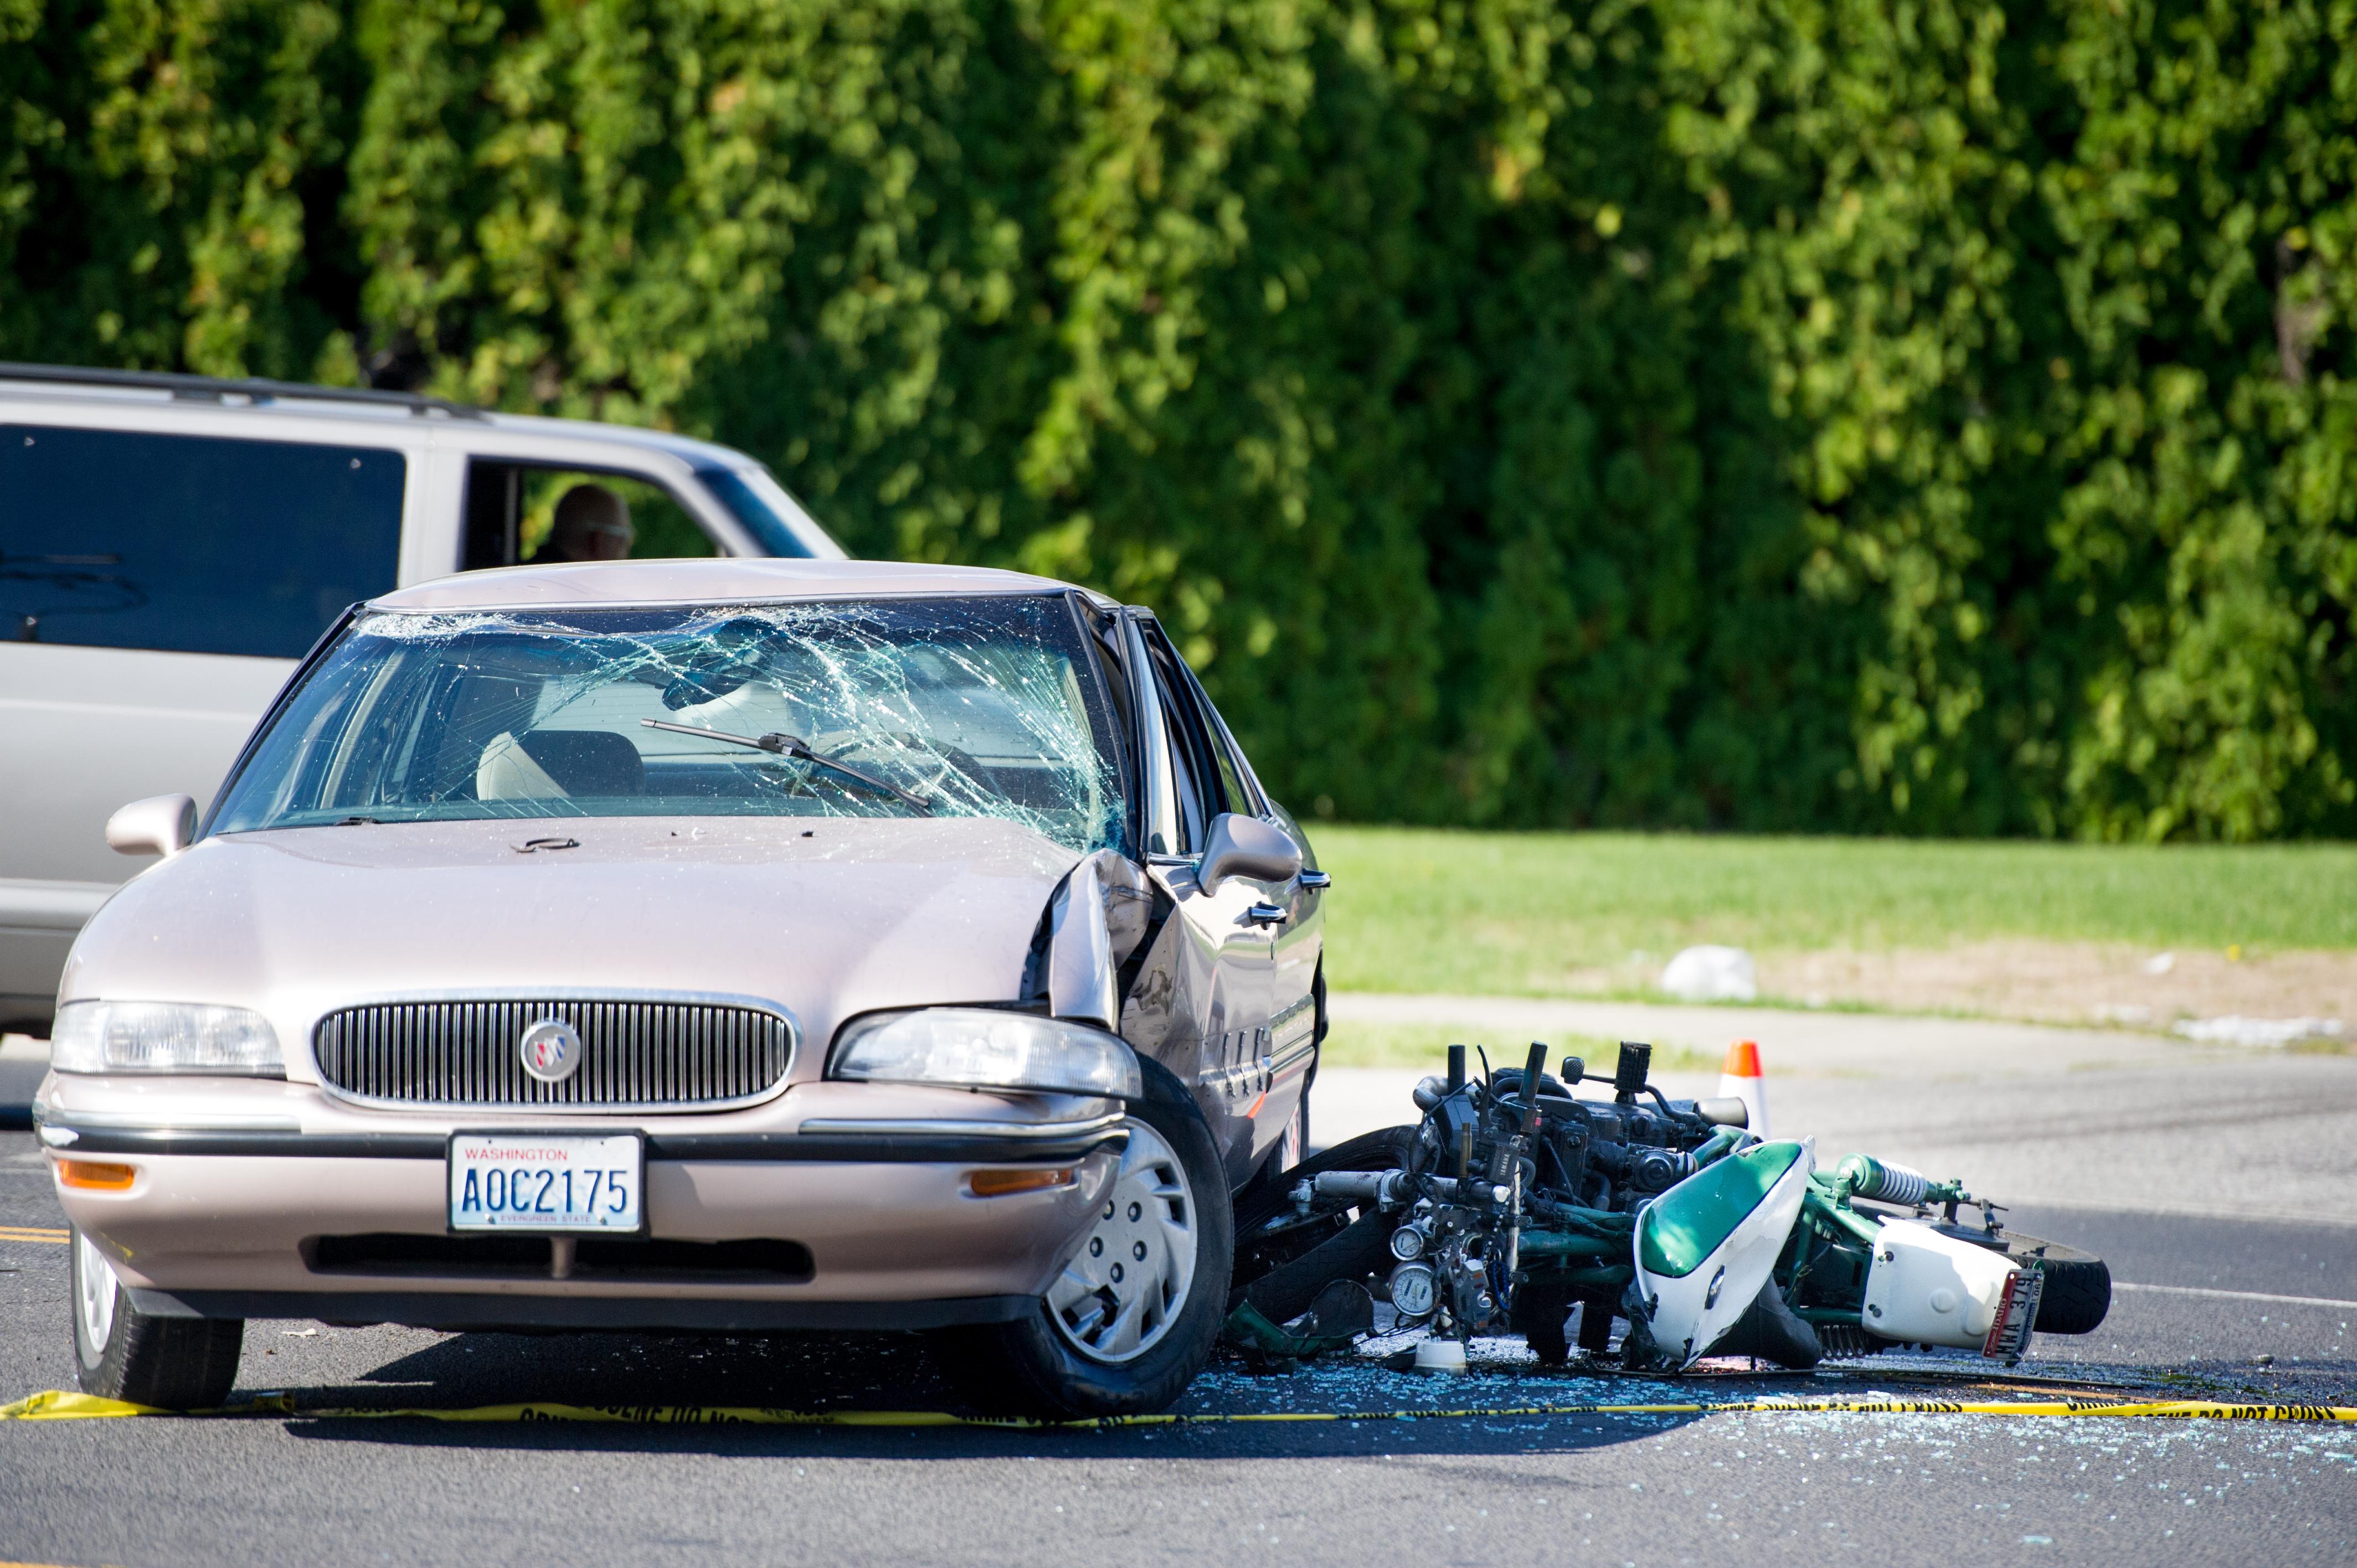 Motorcyclist dies in collision with car in north Spokane | The